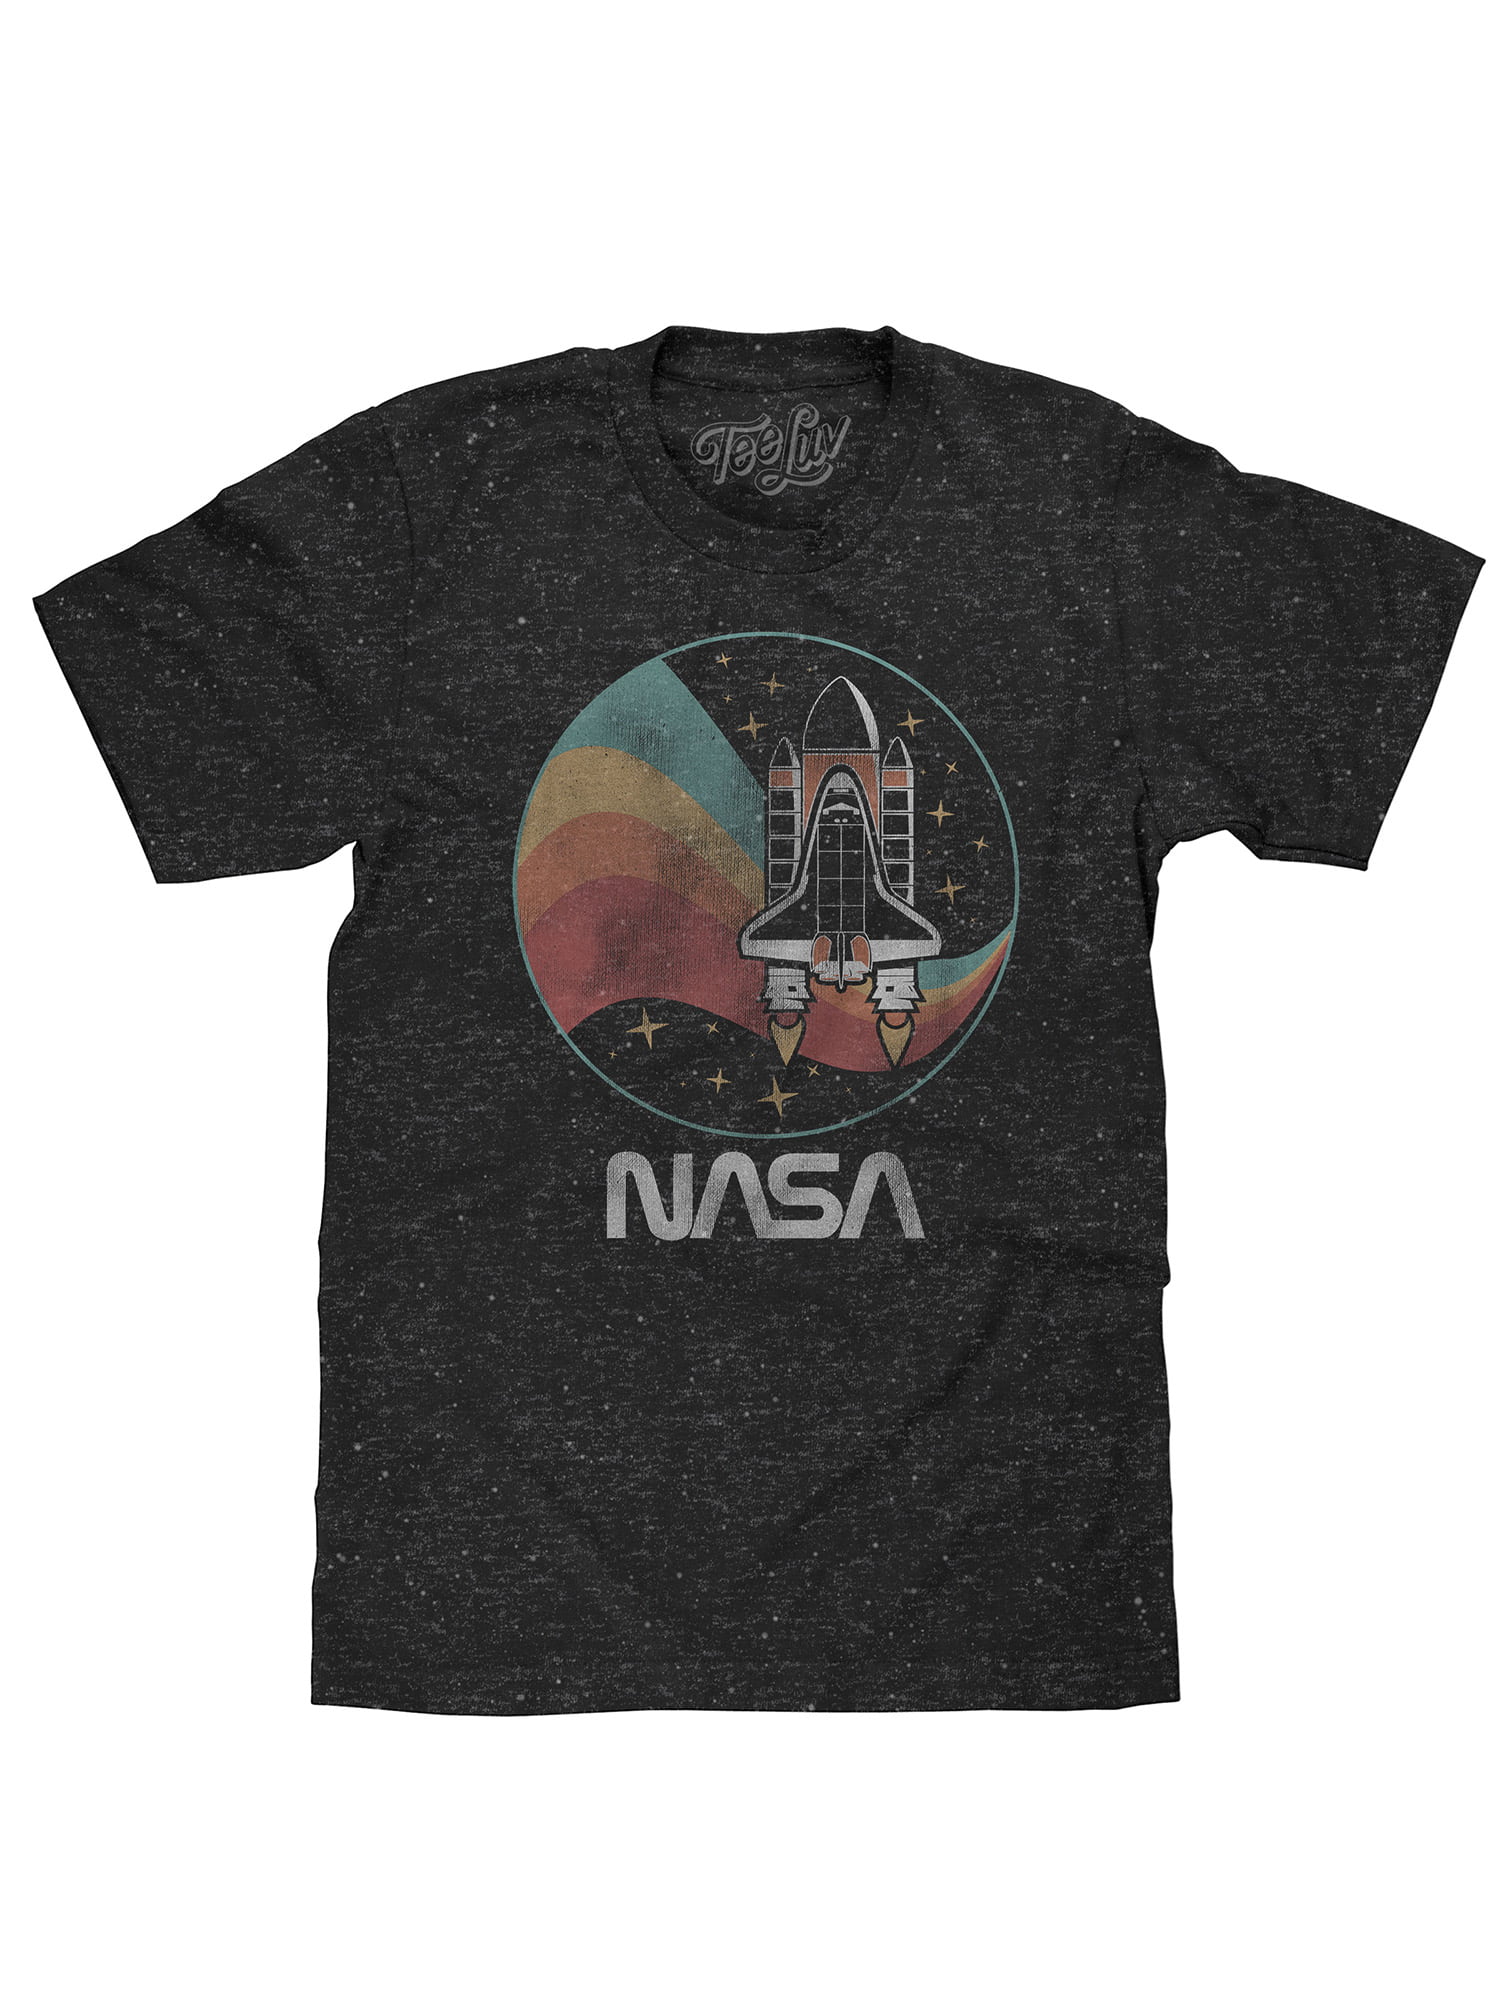 NASA RETRO SPACE SHUTTLE Vintage Style Licensed Adult Heather T-Shirt All Sizes